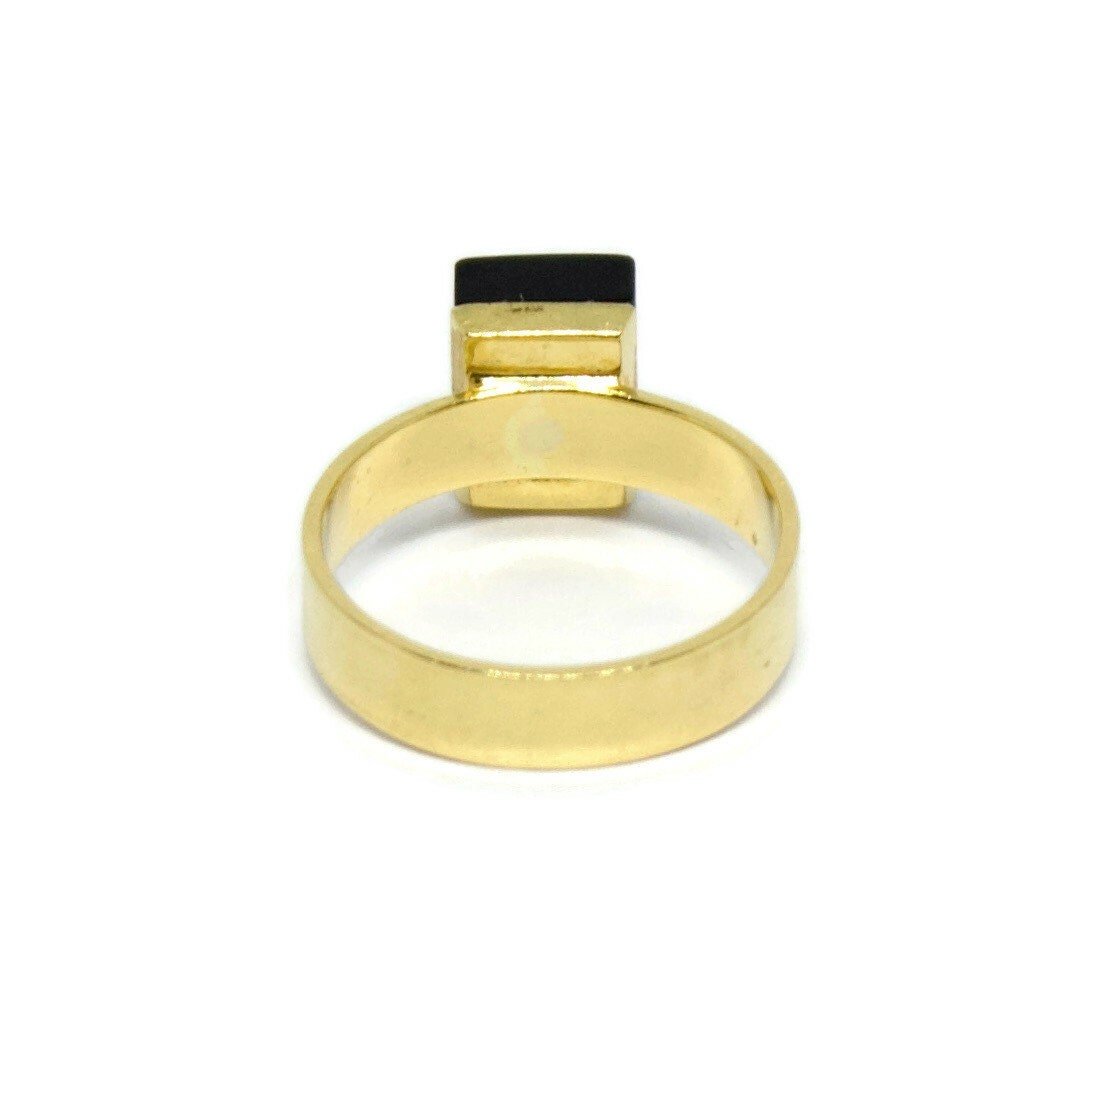 Black Onyx and Diamond Gold Cocktail Ring. Made from 18k solid gold, this statement ring has a black onyx stone with a diamond at its heart.